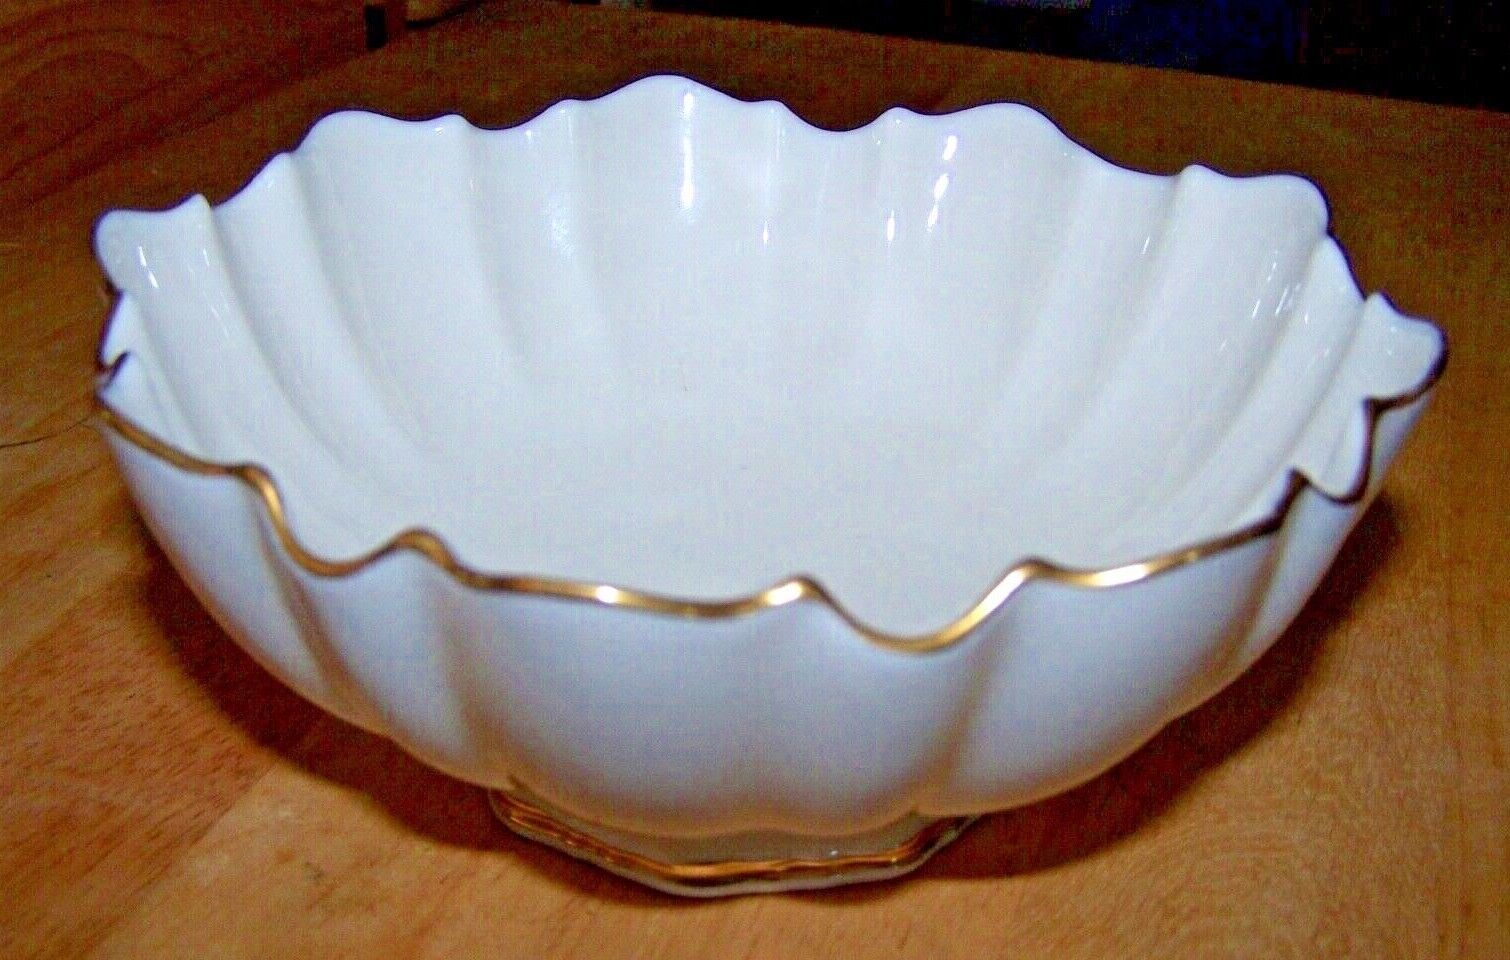 Primary image for LENOX SYMPHONY Open Bonbon, Candy BOWL - Scalloped, Gold Trim - 6" Wide - EUC